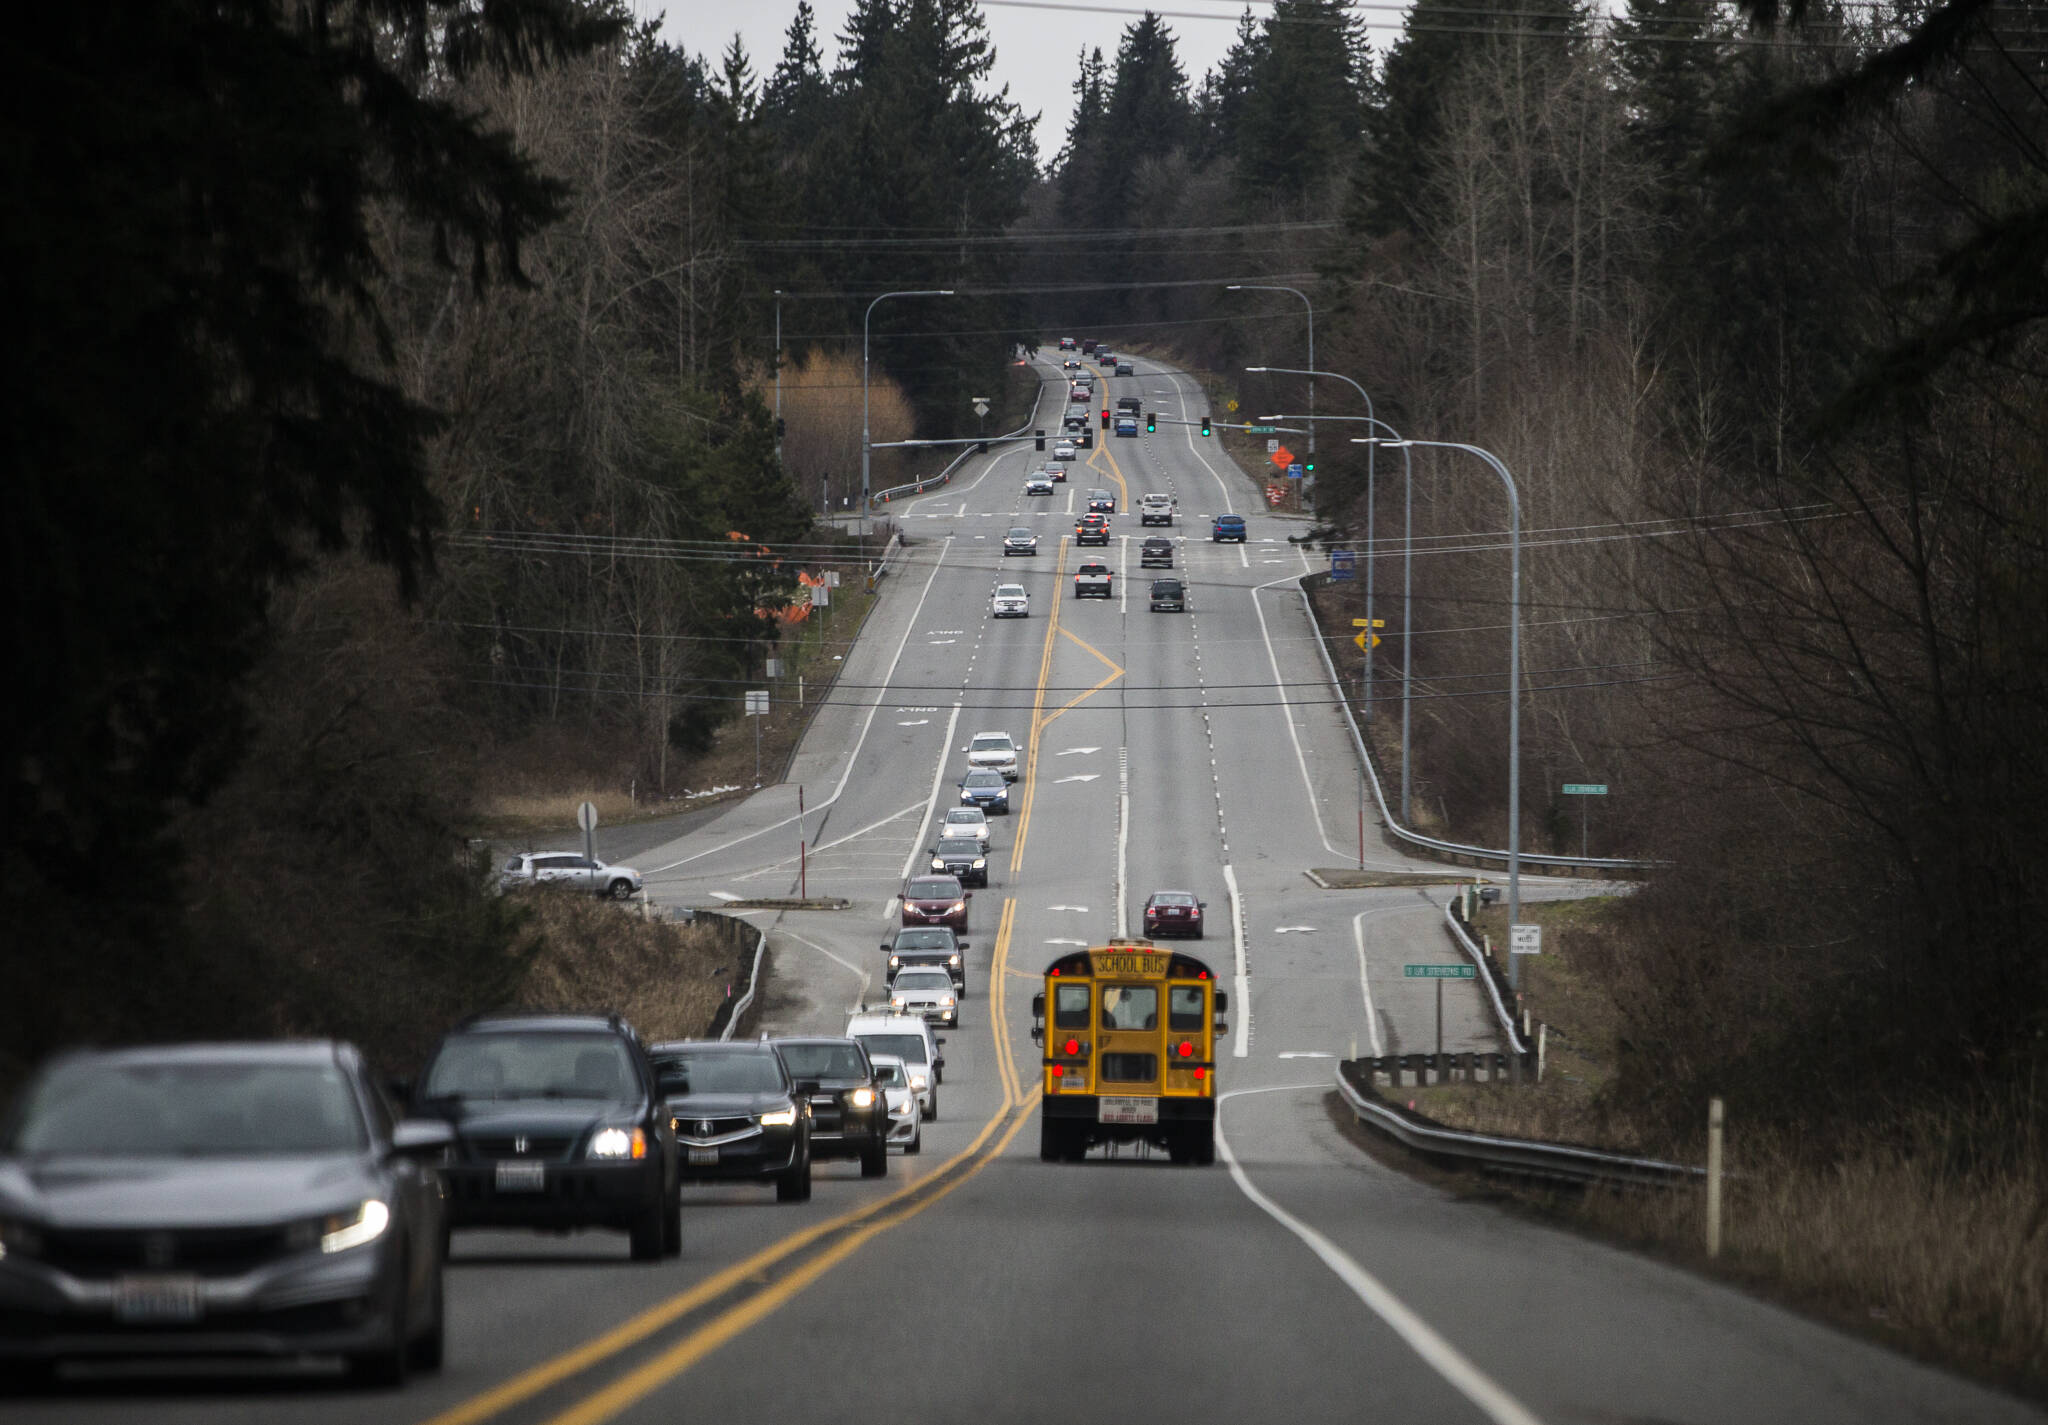 Cars drive along the intersection of Highway 9 and South Lake Stevens Road on Thursday, Feb. 17, 2022 in Lake Stevens, Washington. (Olivia Vanni / The Herald)